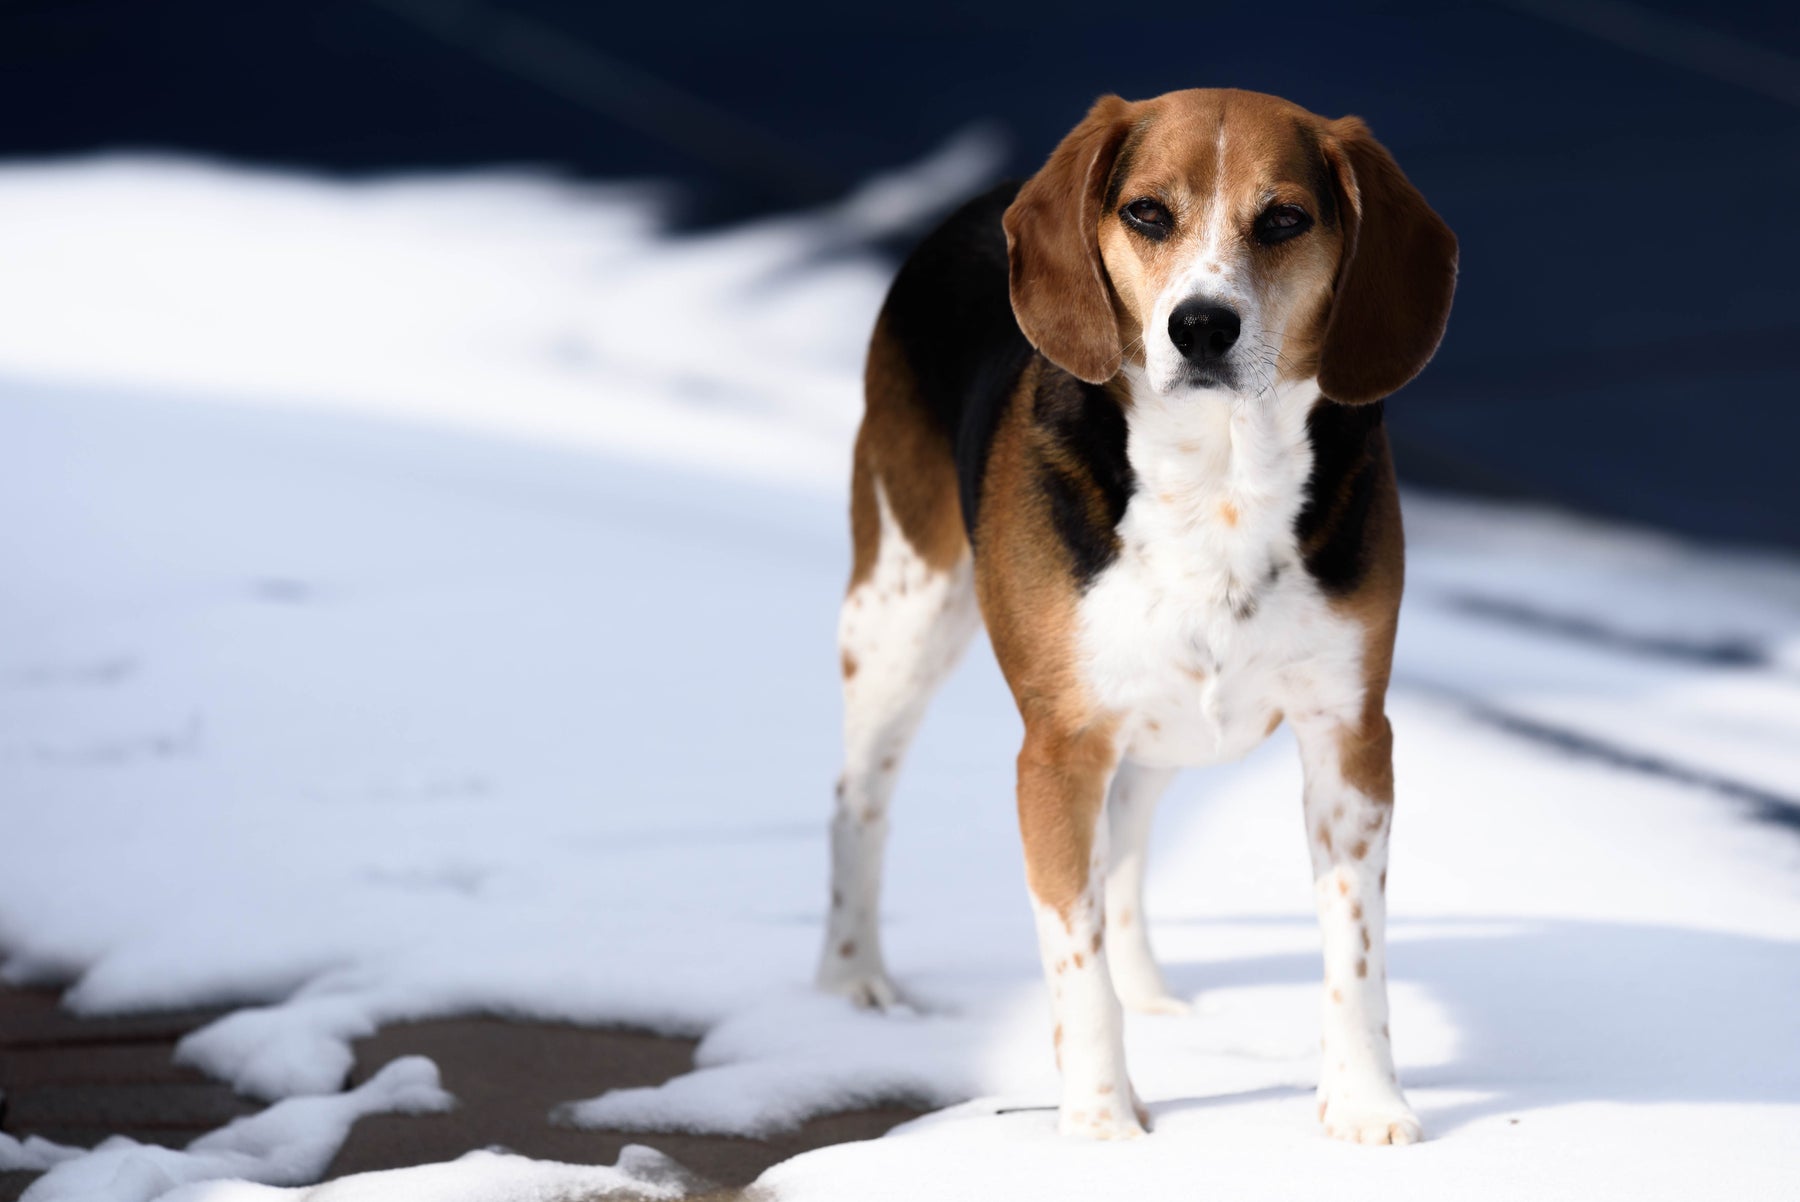 How to Protect Your Pet During the Winter